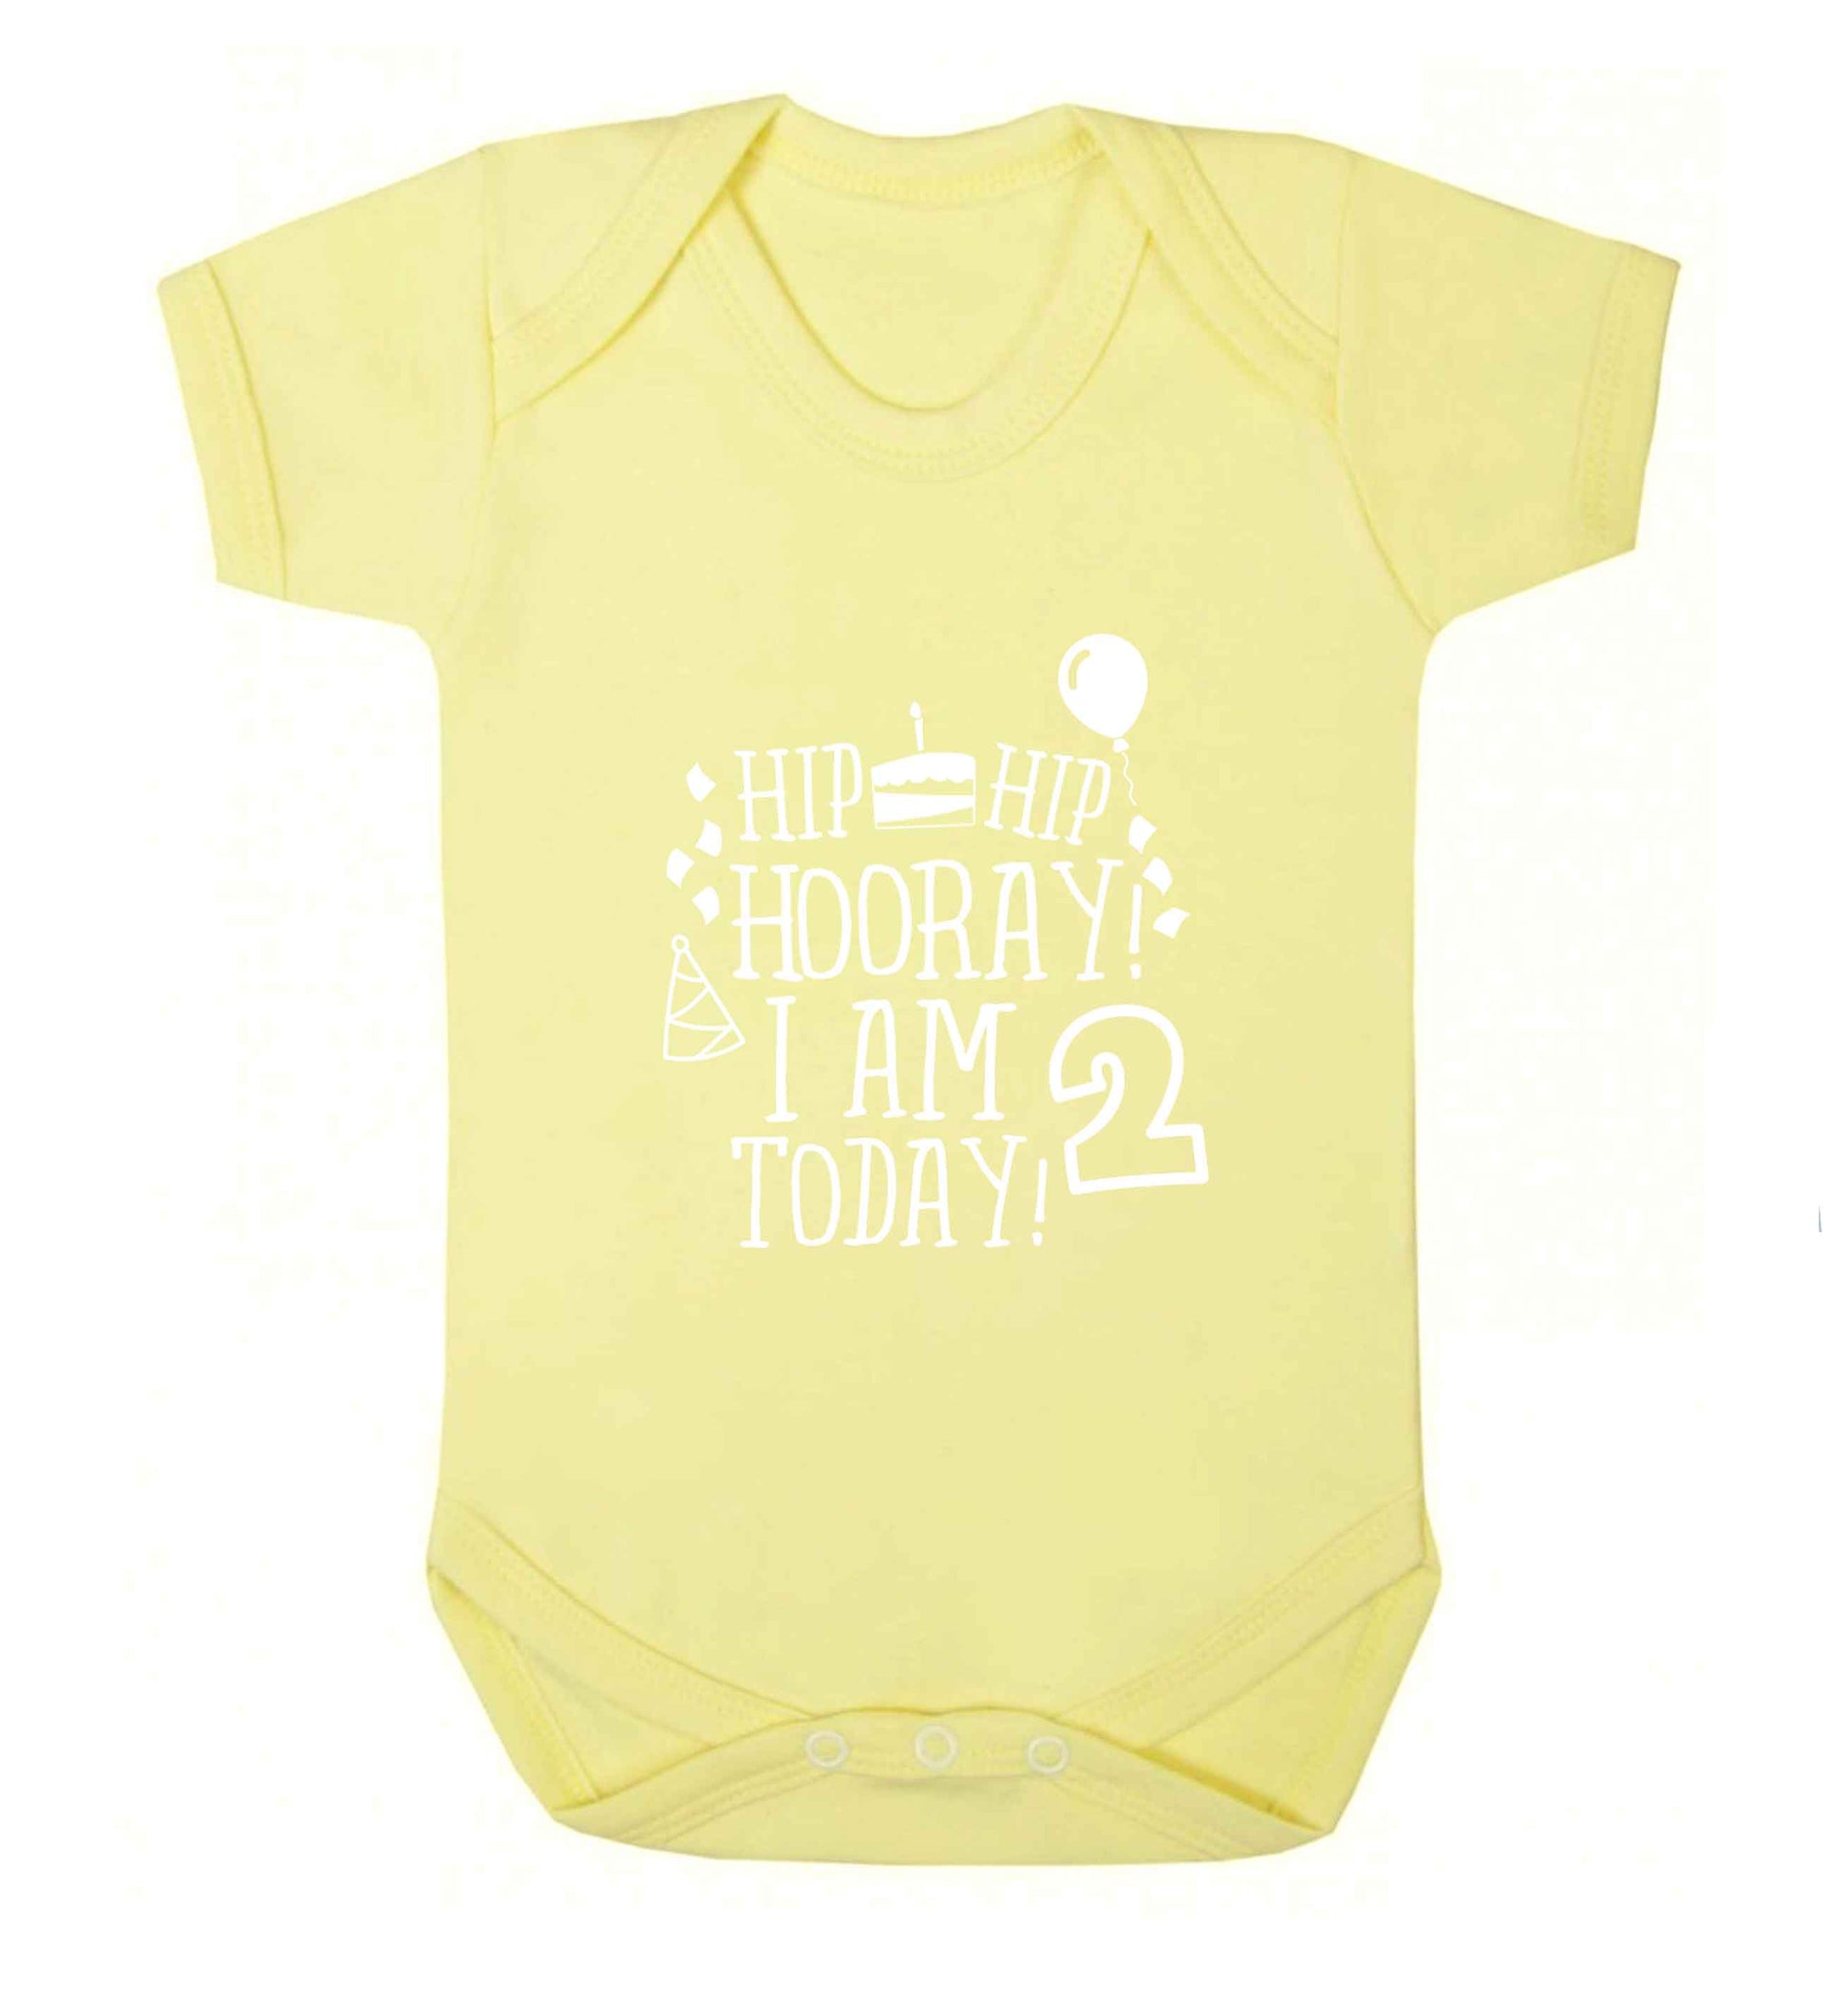 I'm 2 Today baby vest pale yellow 18-24 months